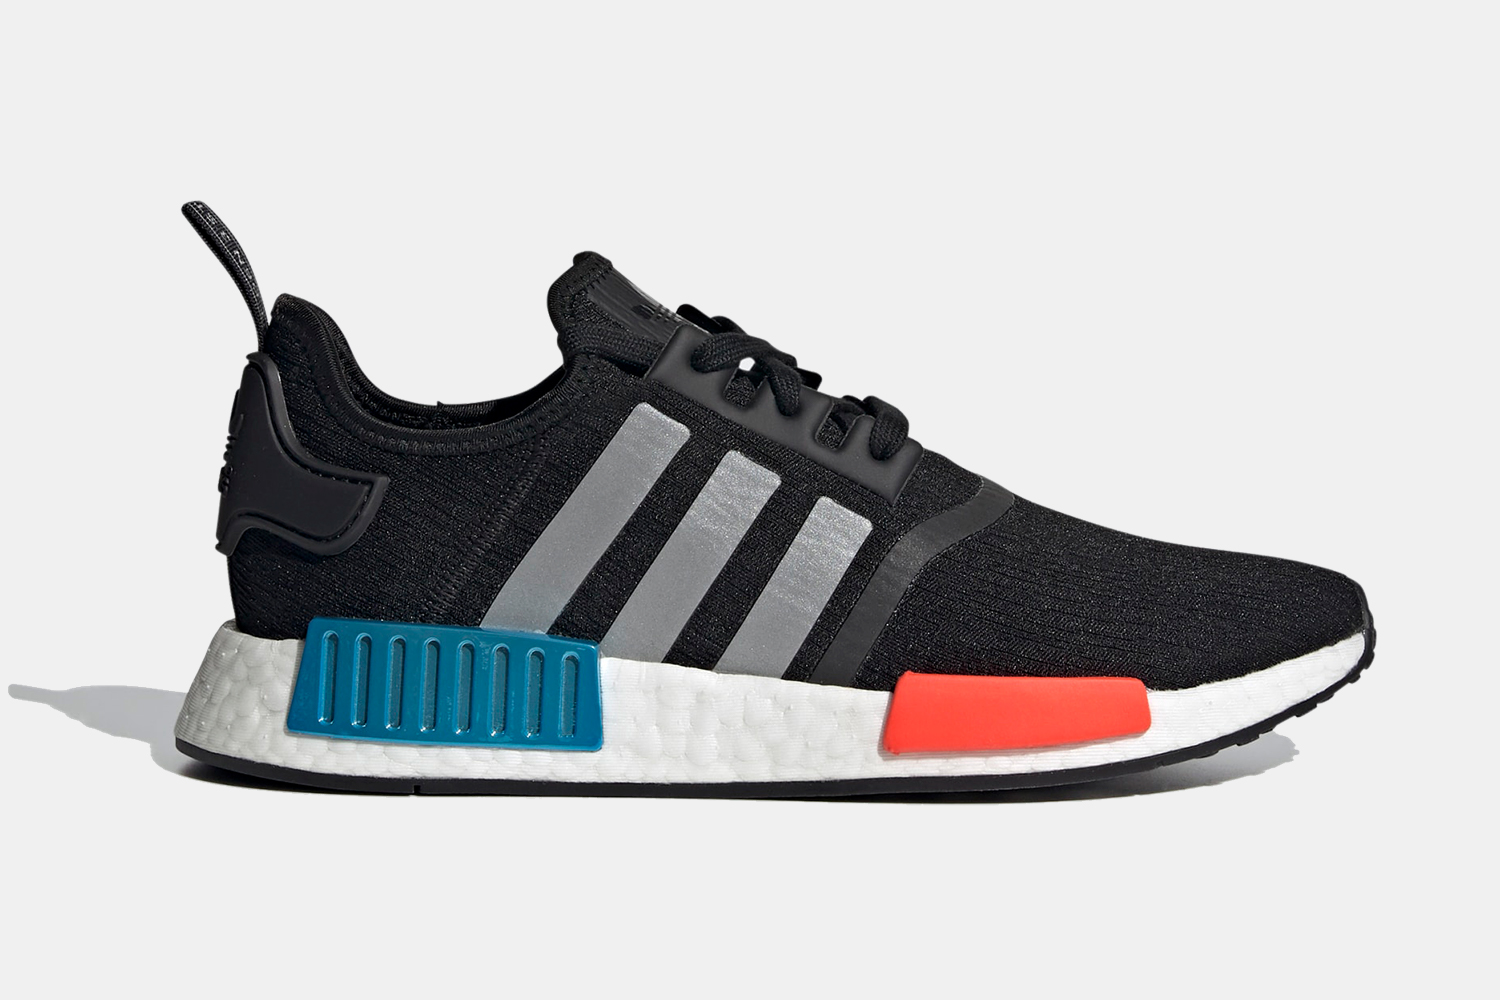 Adidas NMD_R1 casual sneakers with blue and orange accents